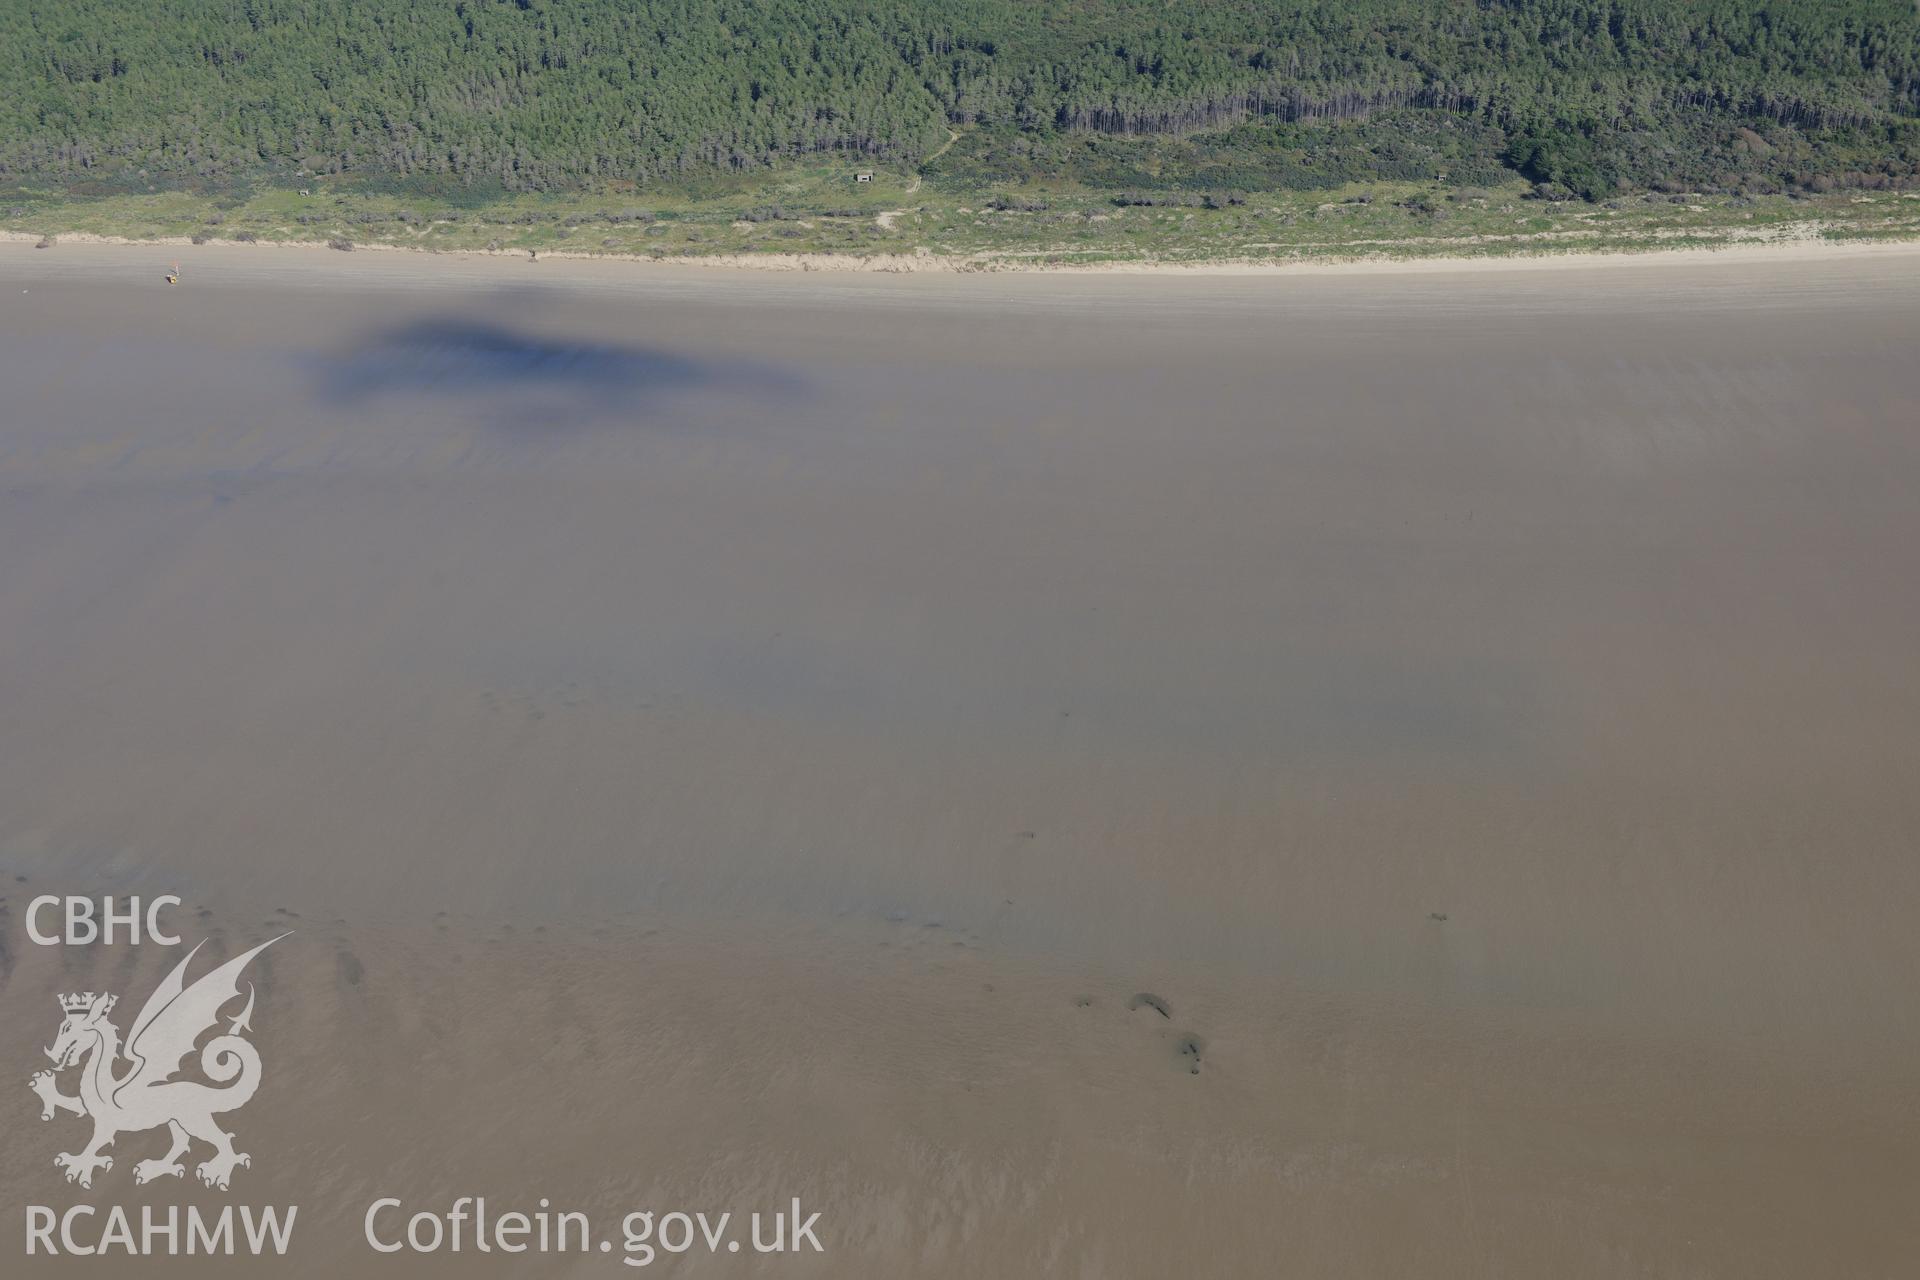 Post medieval wreck on the Cefn Sidan sands, Pembrey, at low tide. Oblique aerial photograph taken during the Royal Commission's programme of archaeological aerial reconnaissance by Toby Driver on 30th September 2015.